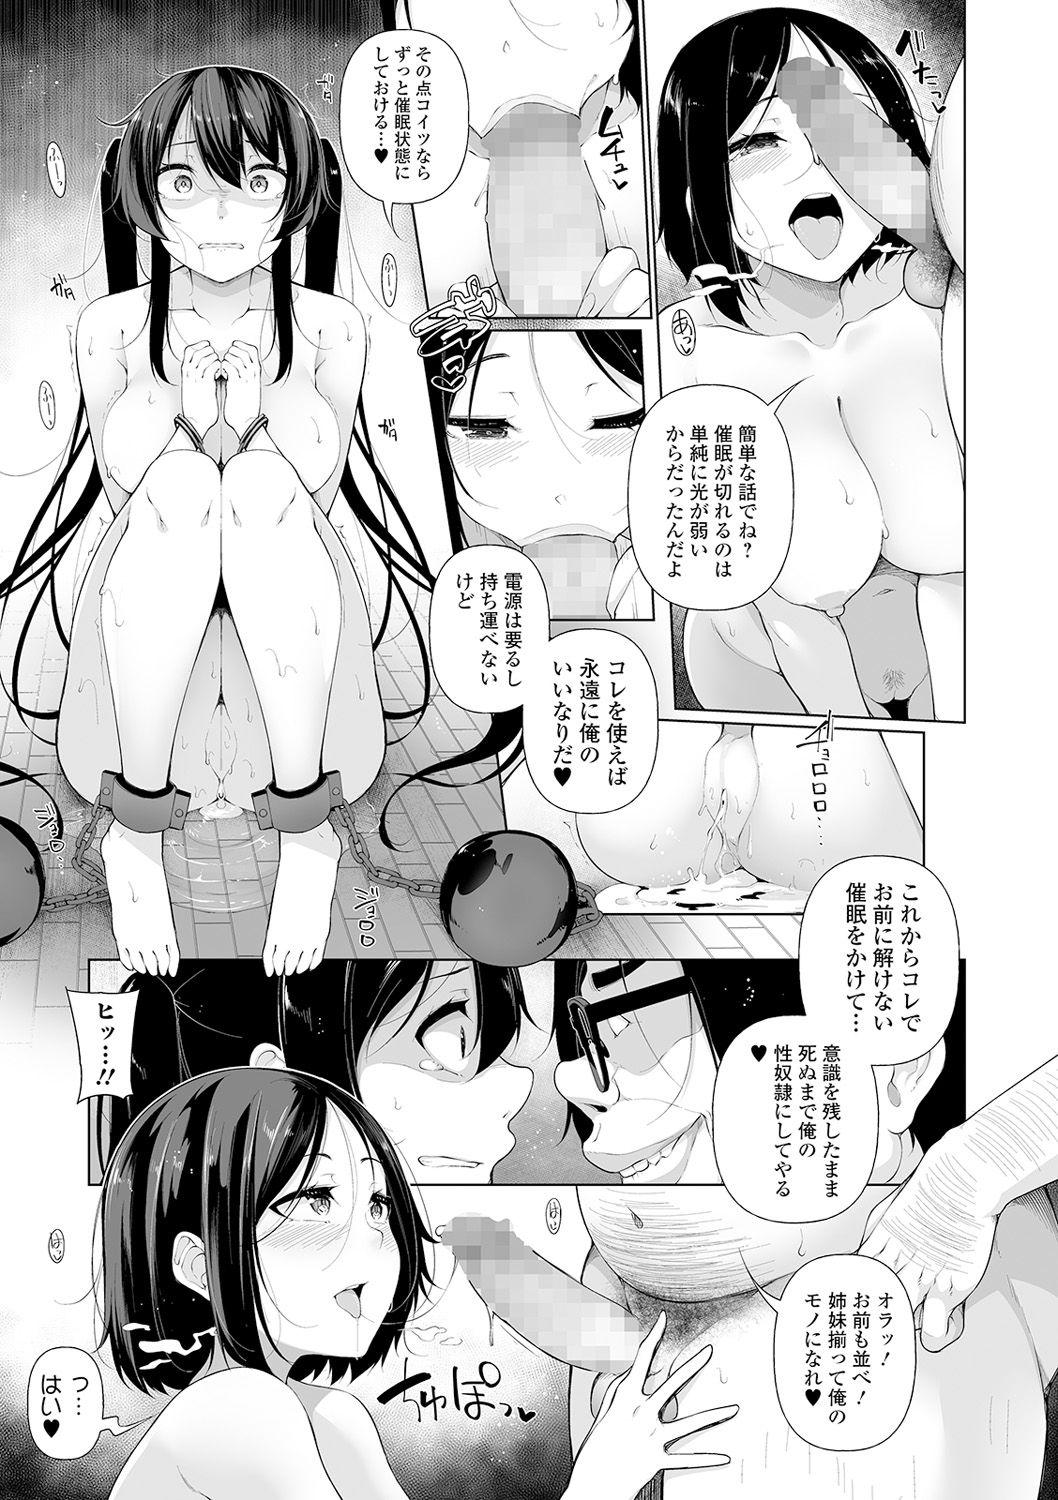 Cousin COMIC Mate Legend Vol. 33 2020-06 Shaking - Page 11